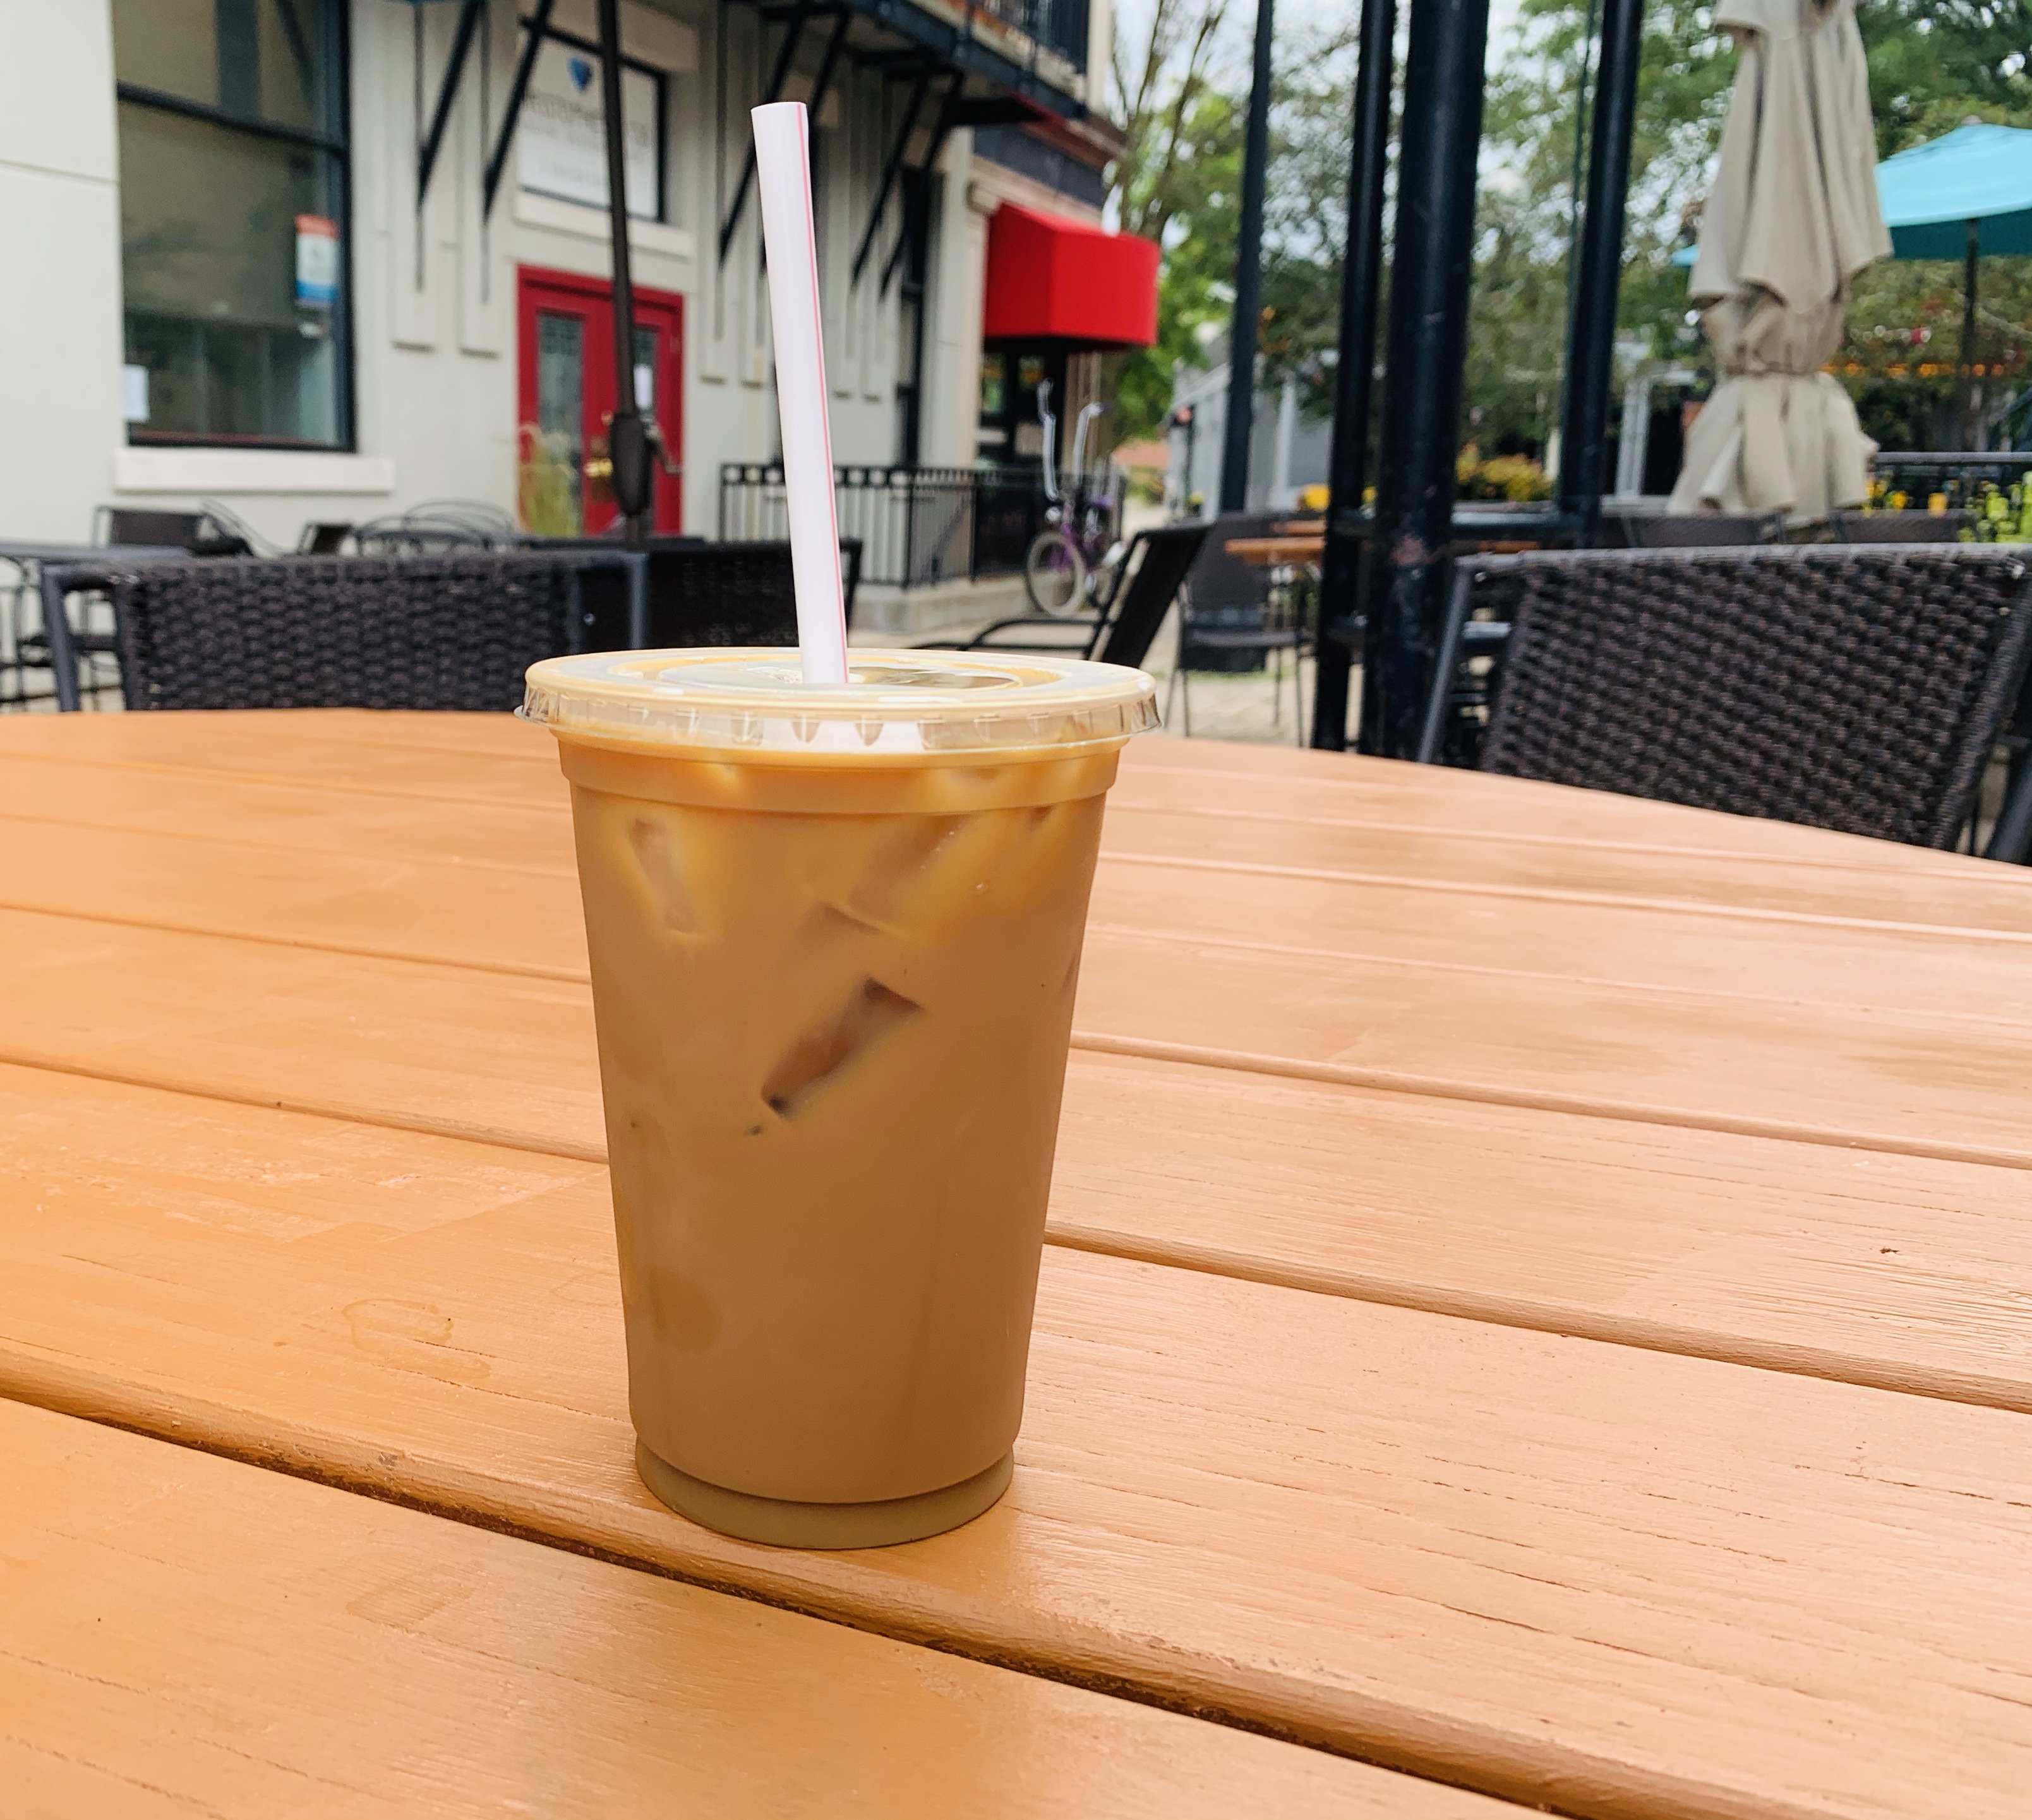 Cool down this summer with locally made iced lattes